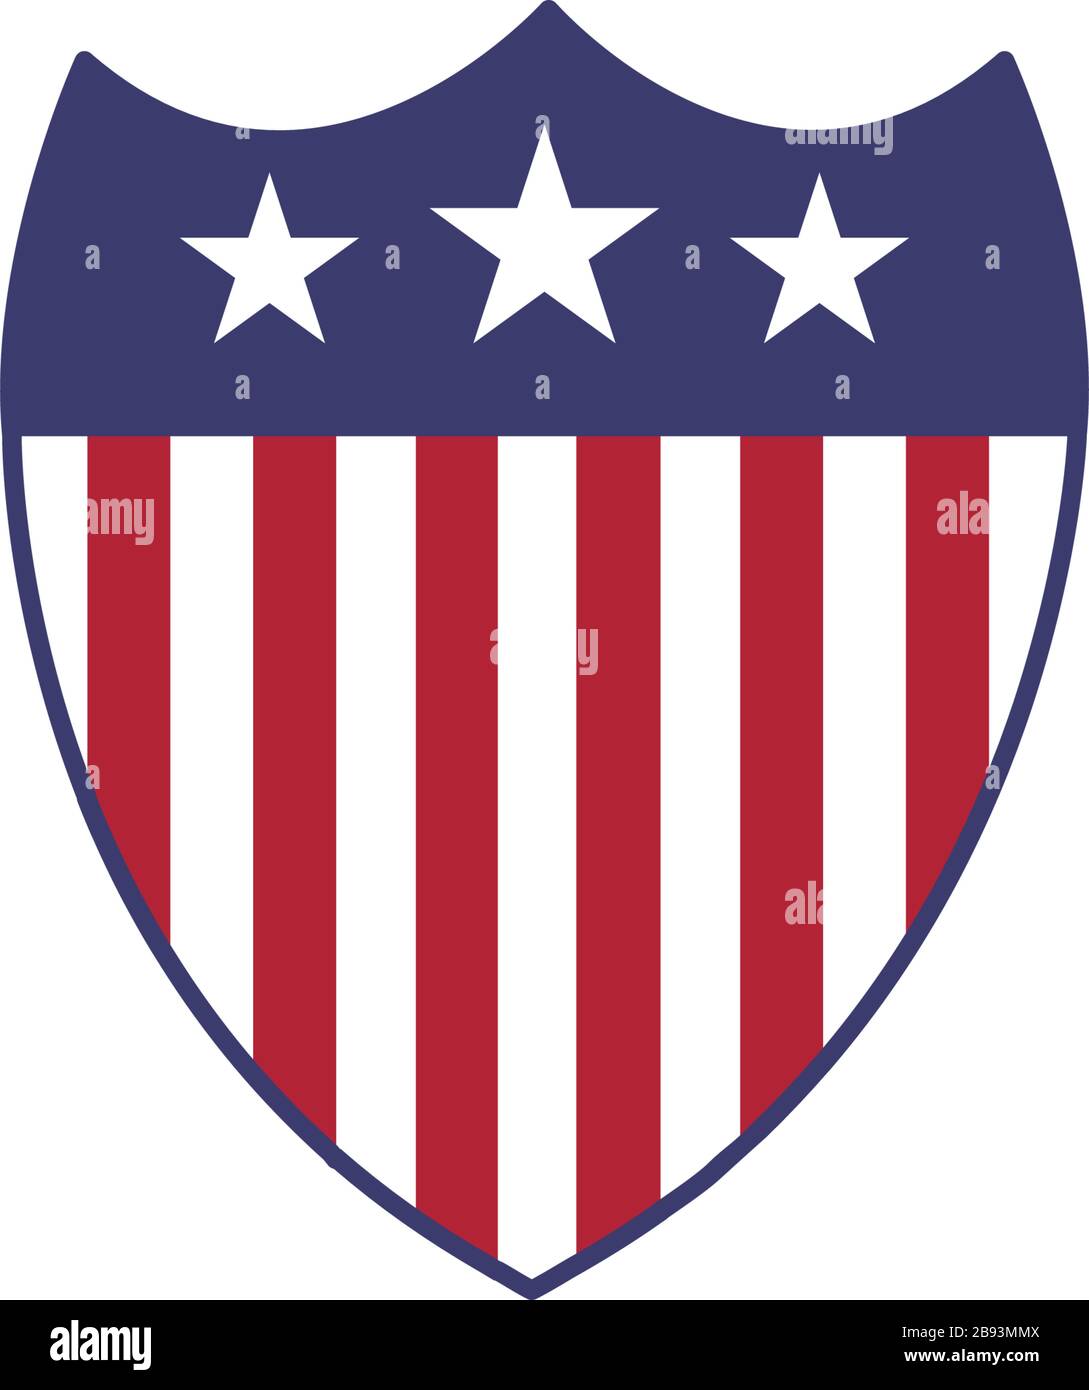 American flag and stars national shield emblem. Stock Vector illustration isolated on white background. Stock Vector